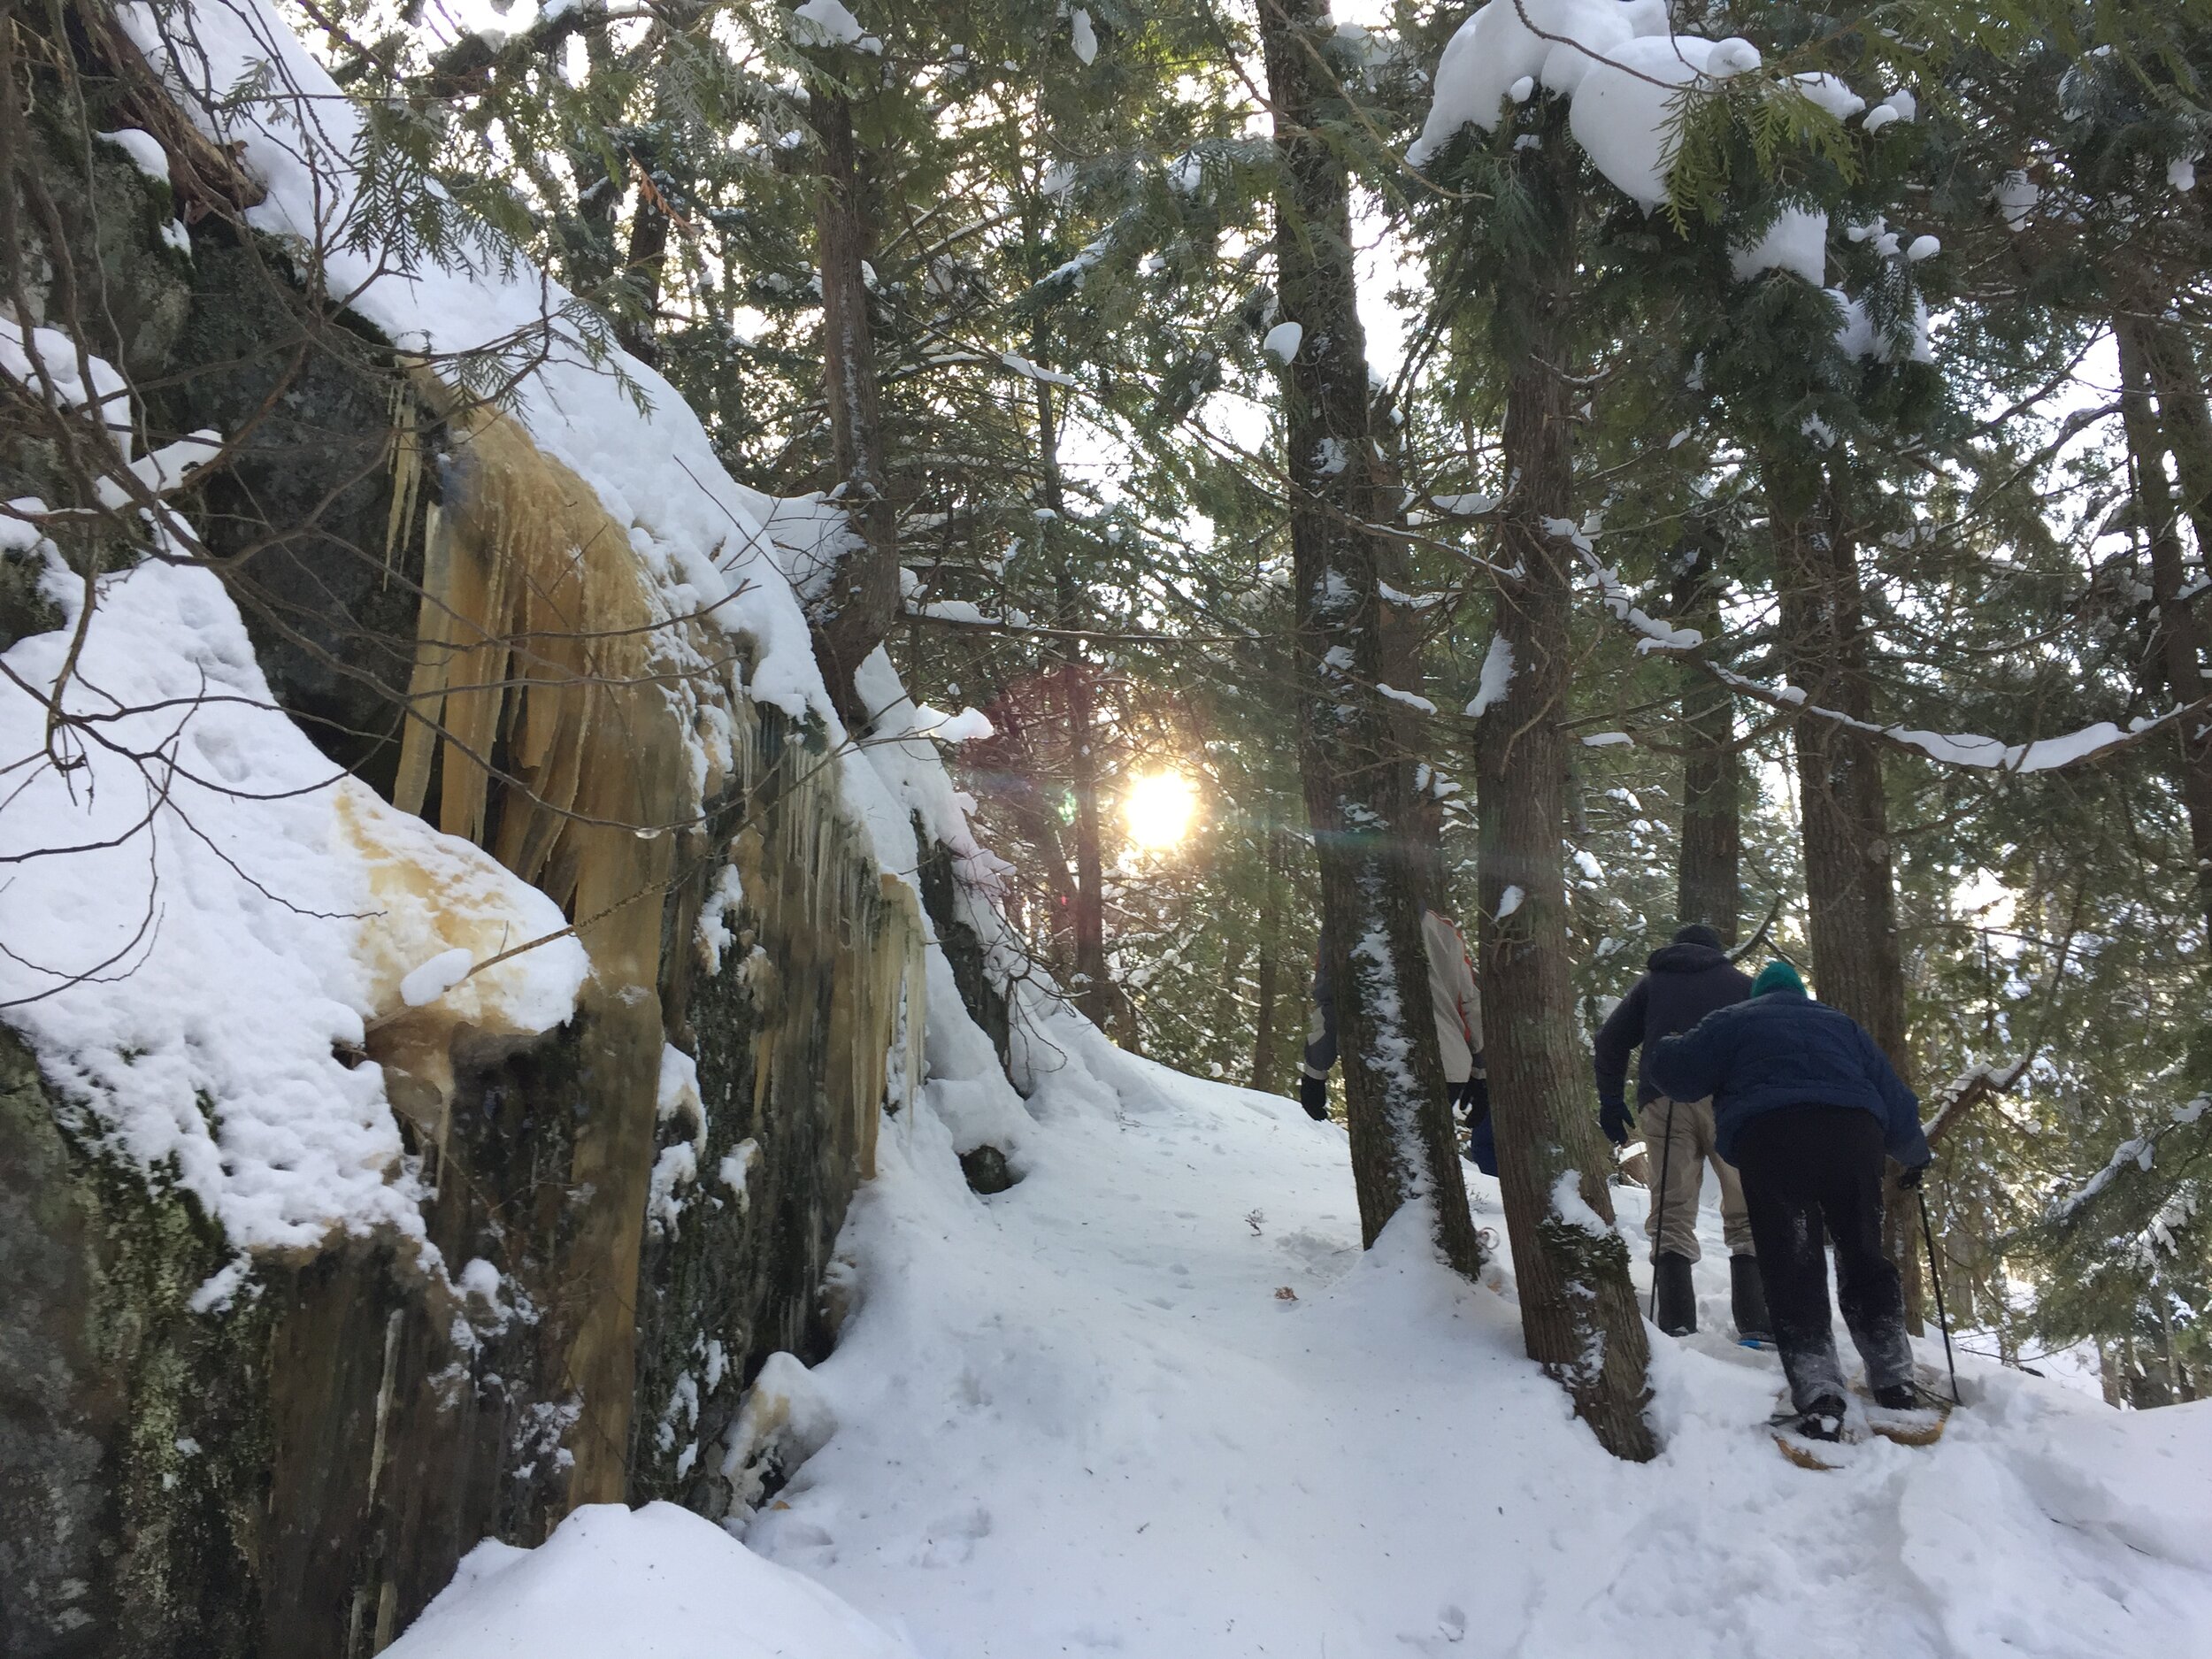 Snowshoers ascend around the outcrop